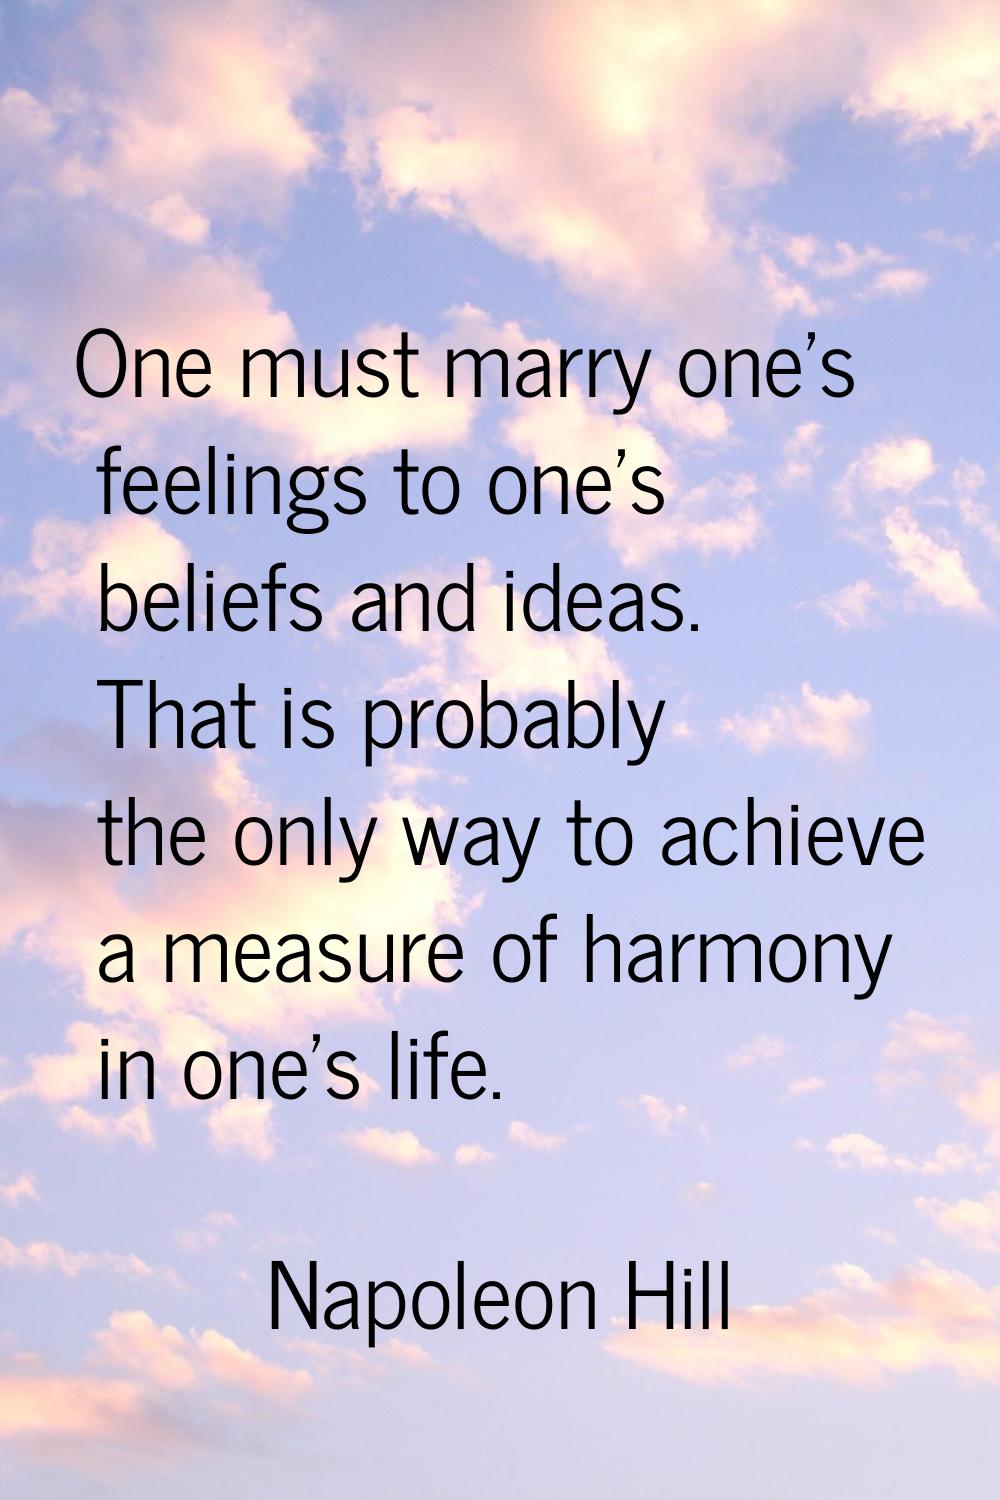 One must marry one's feelings to one's beliefs and ideas. That is probably the only way to achieve 